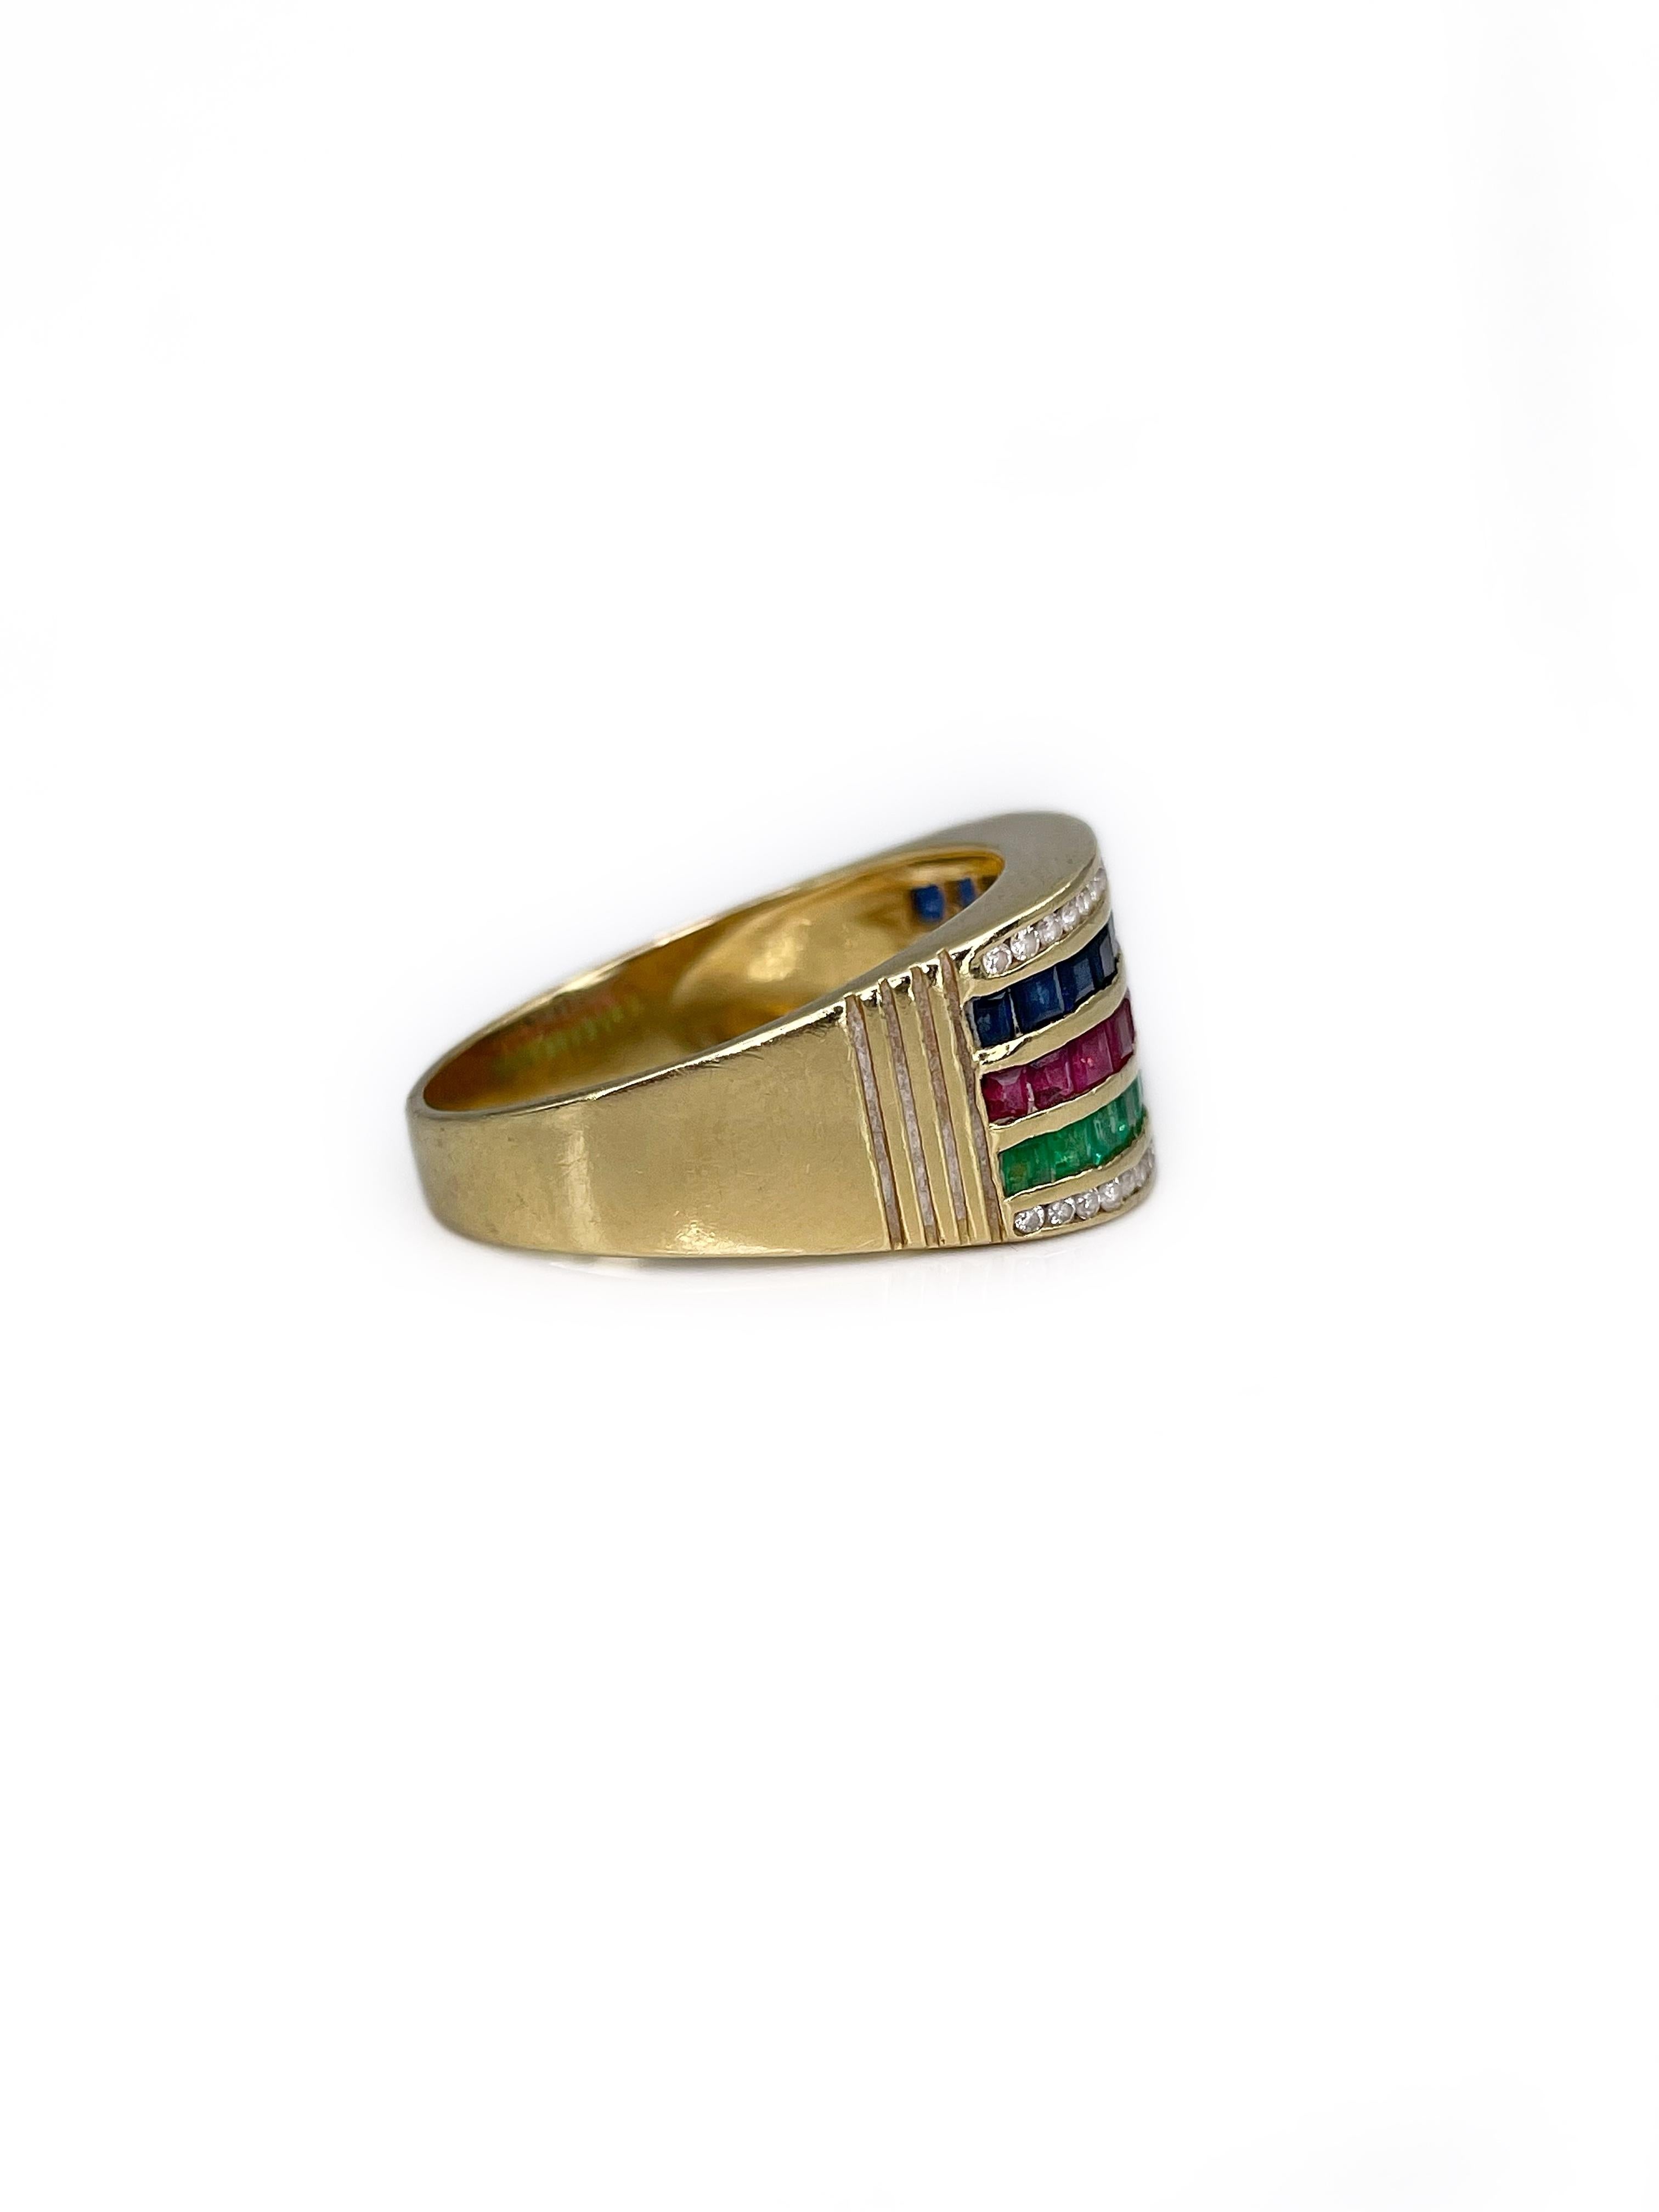 This is a vintage wide band ring crafted in 18K yellow gold. The piece features all big four gems:
- diamonds: 40pcs., brilliant cut, 0.18ct, RW-STW, VS-SI
- rubies: 12pcs., square cut, 0.55ct, slpR 5/4, VS-SI
- sapphires: 12pcs., square cut,